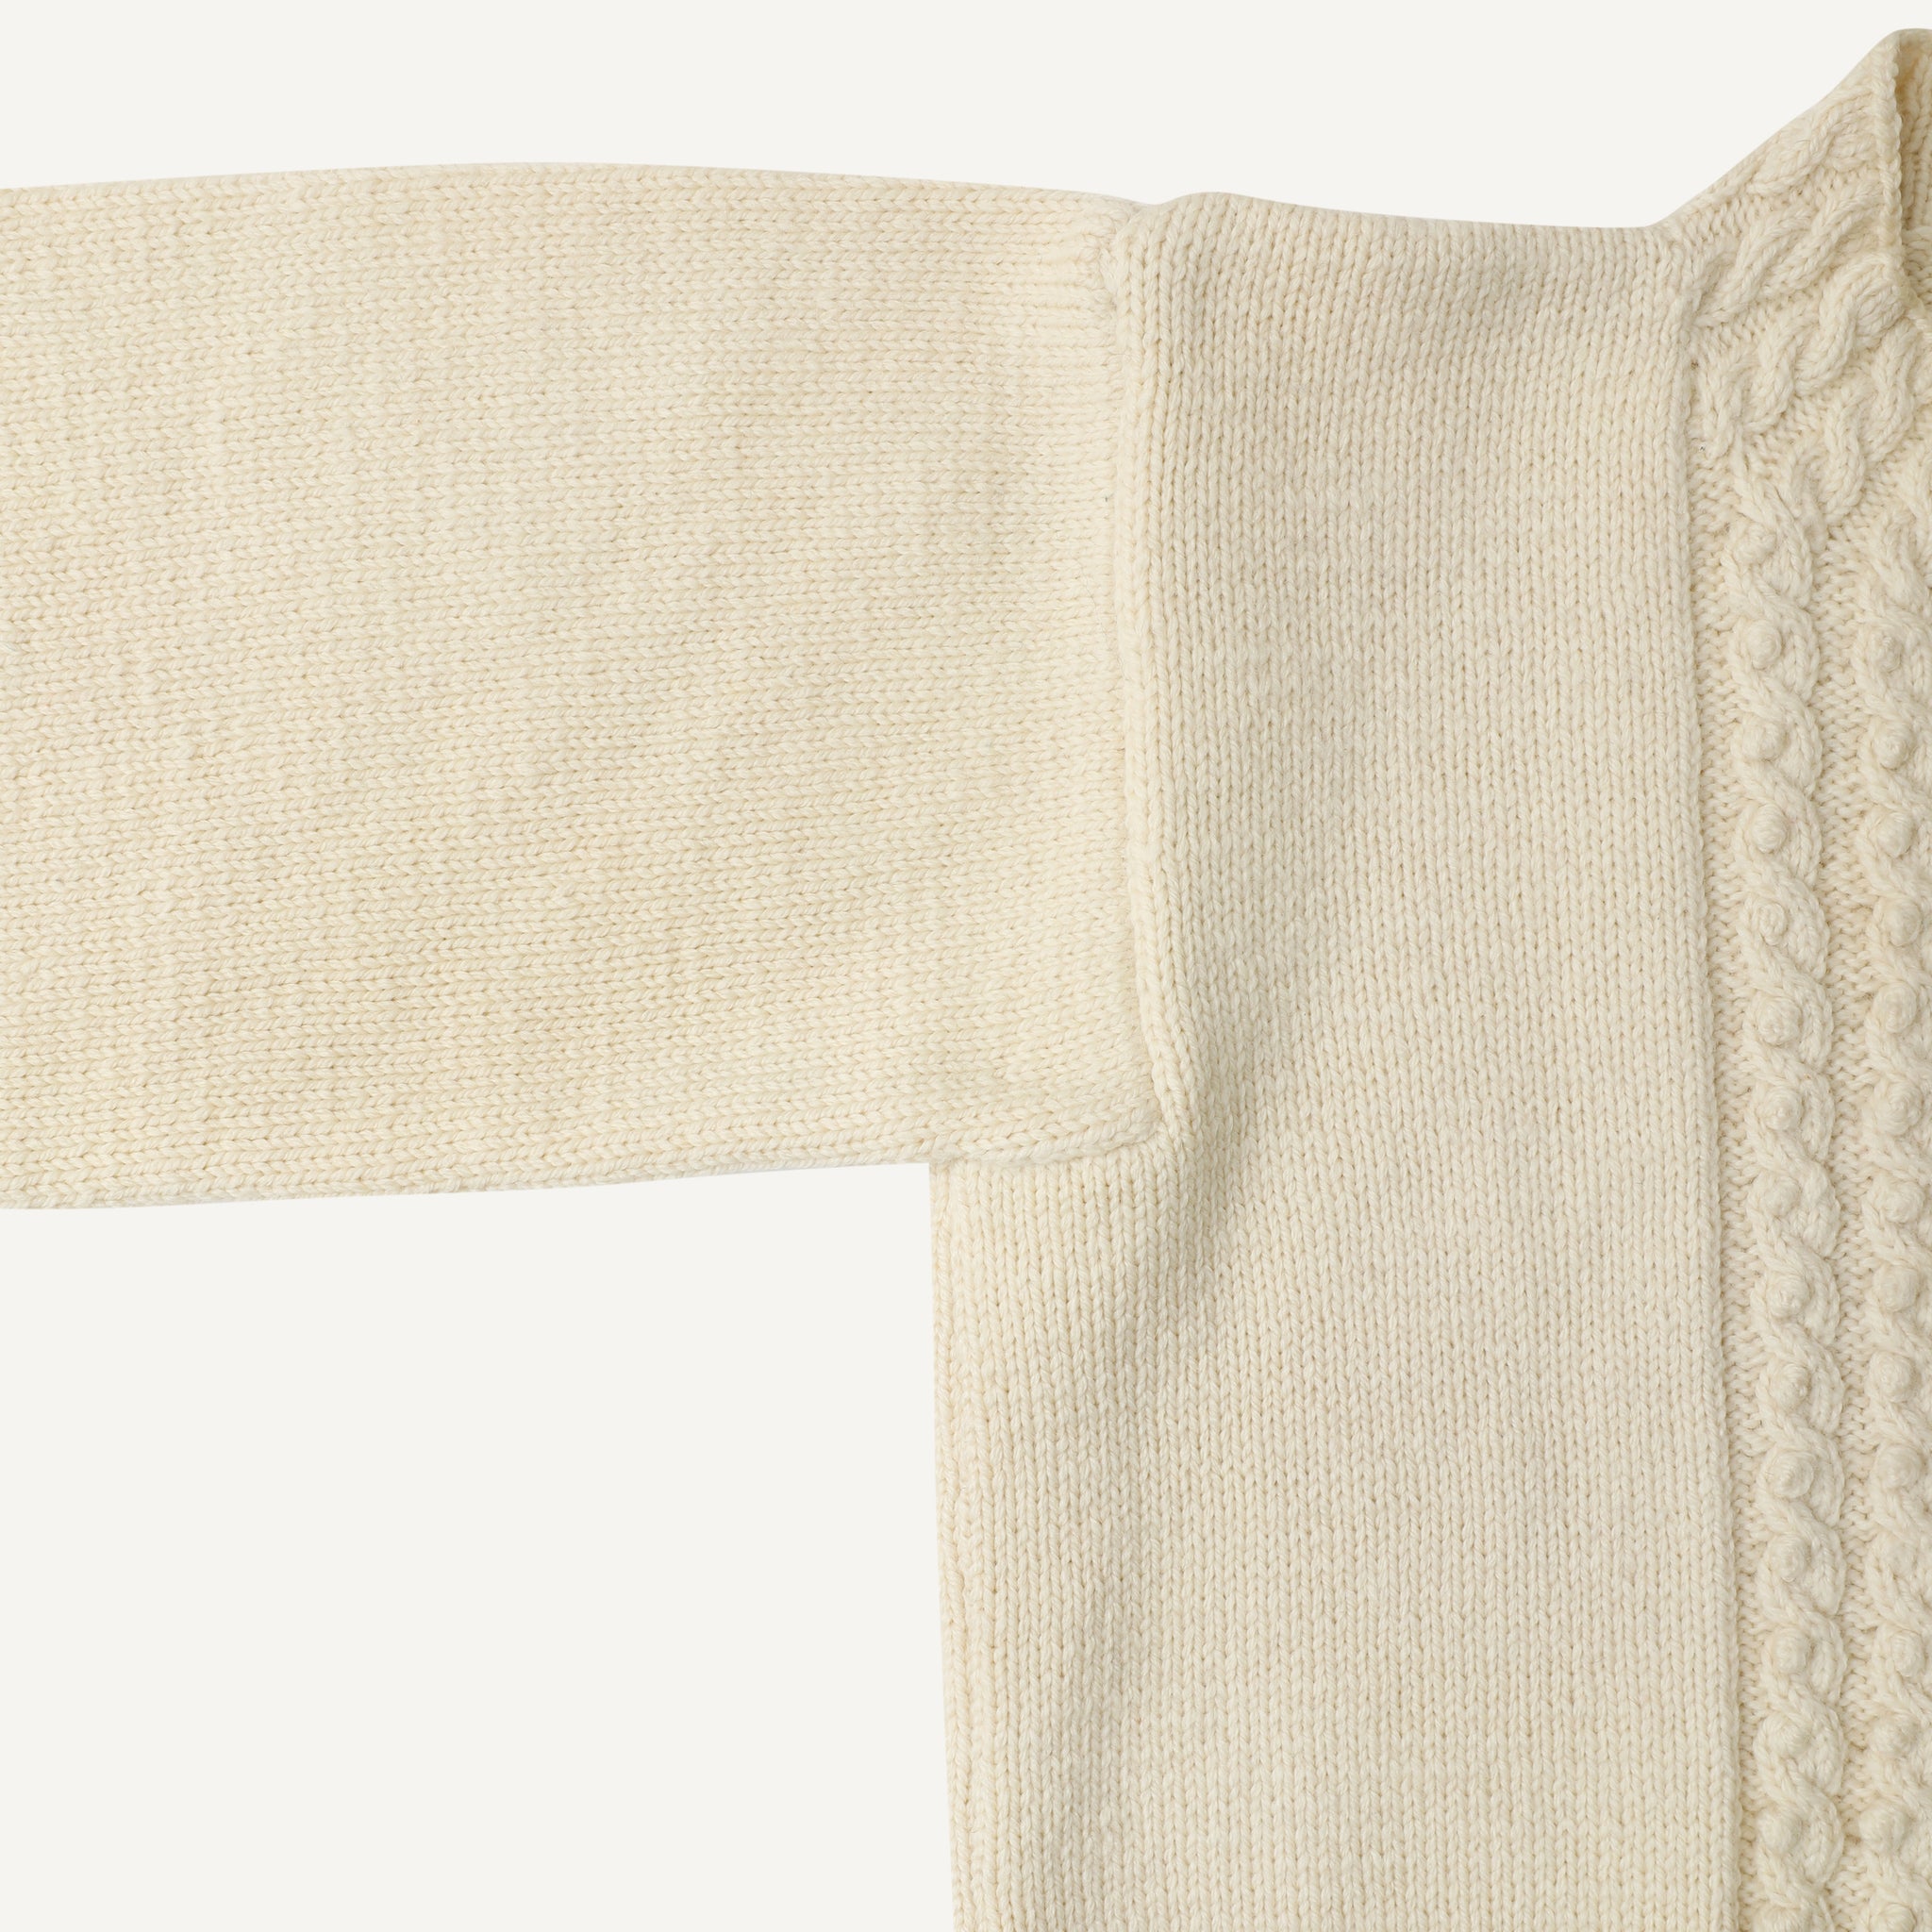 VINTAGE NORTH OF NEW YORK + PLAIN GOODS HAND KNIT SWEATER